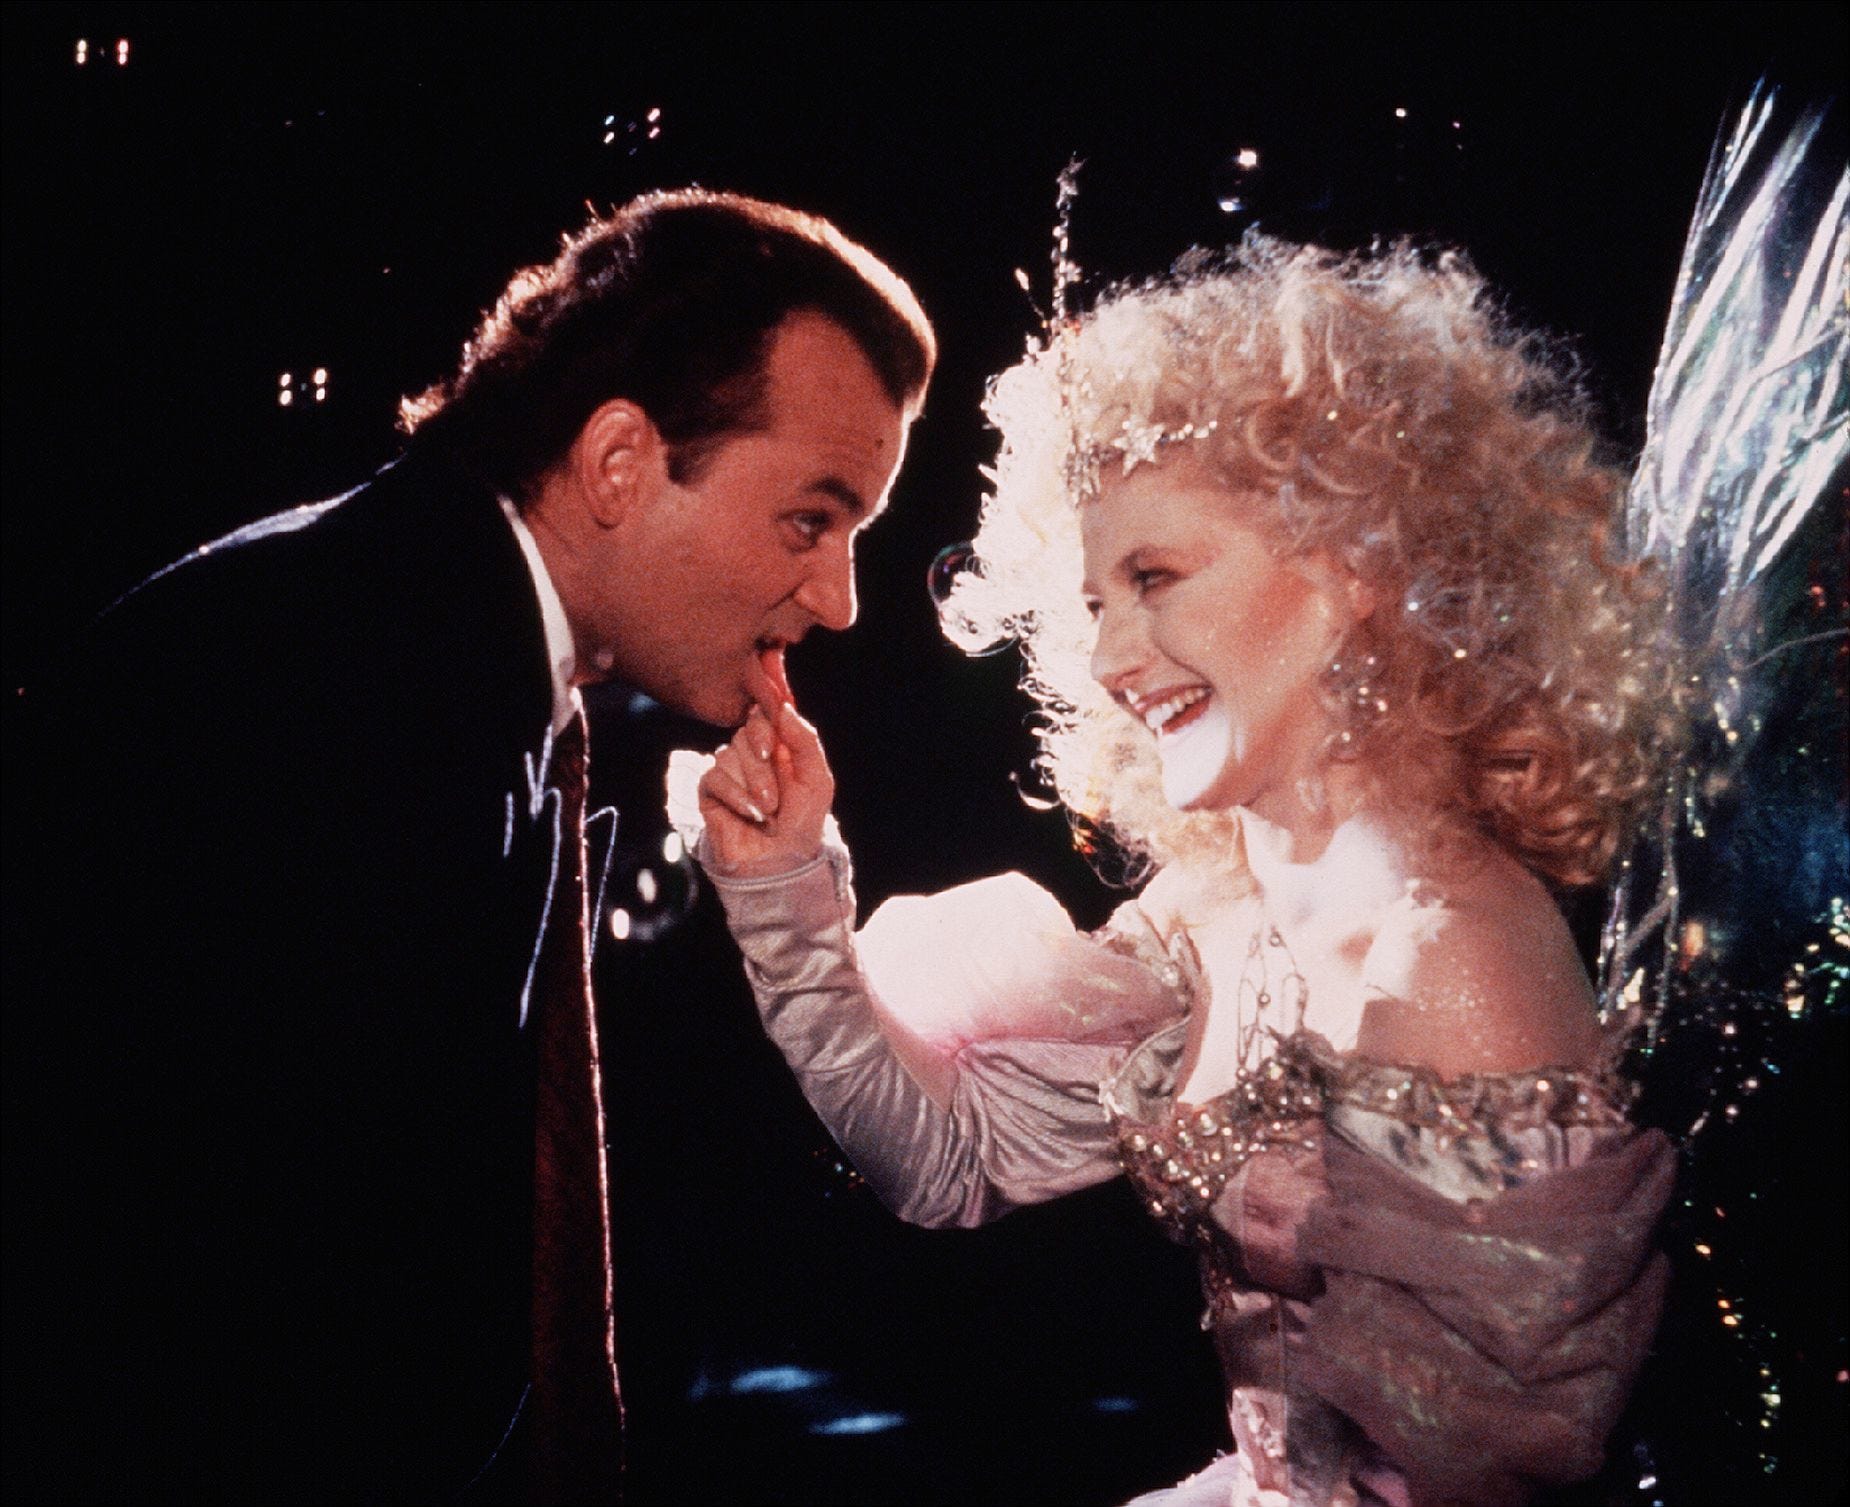 Humbug-y TV executive Frank Cross (Bill Murray) encounters a playfully vicious Ghost of Christmas Past (Carol Kane) in 